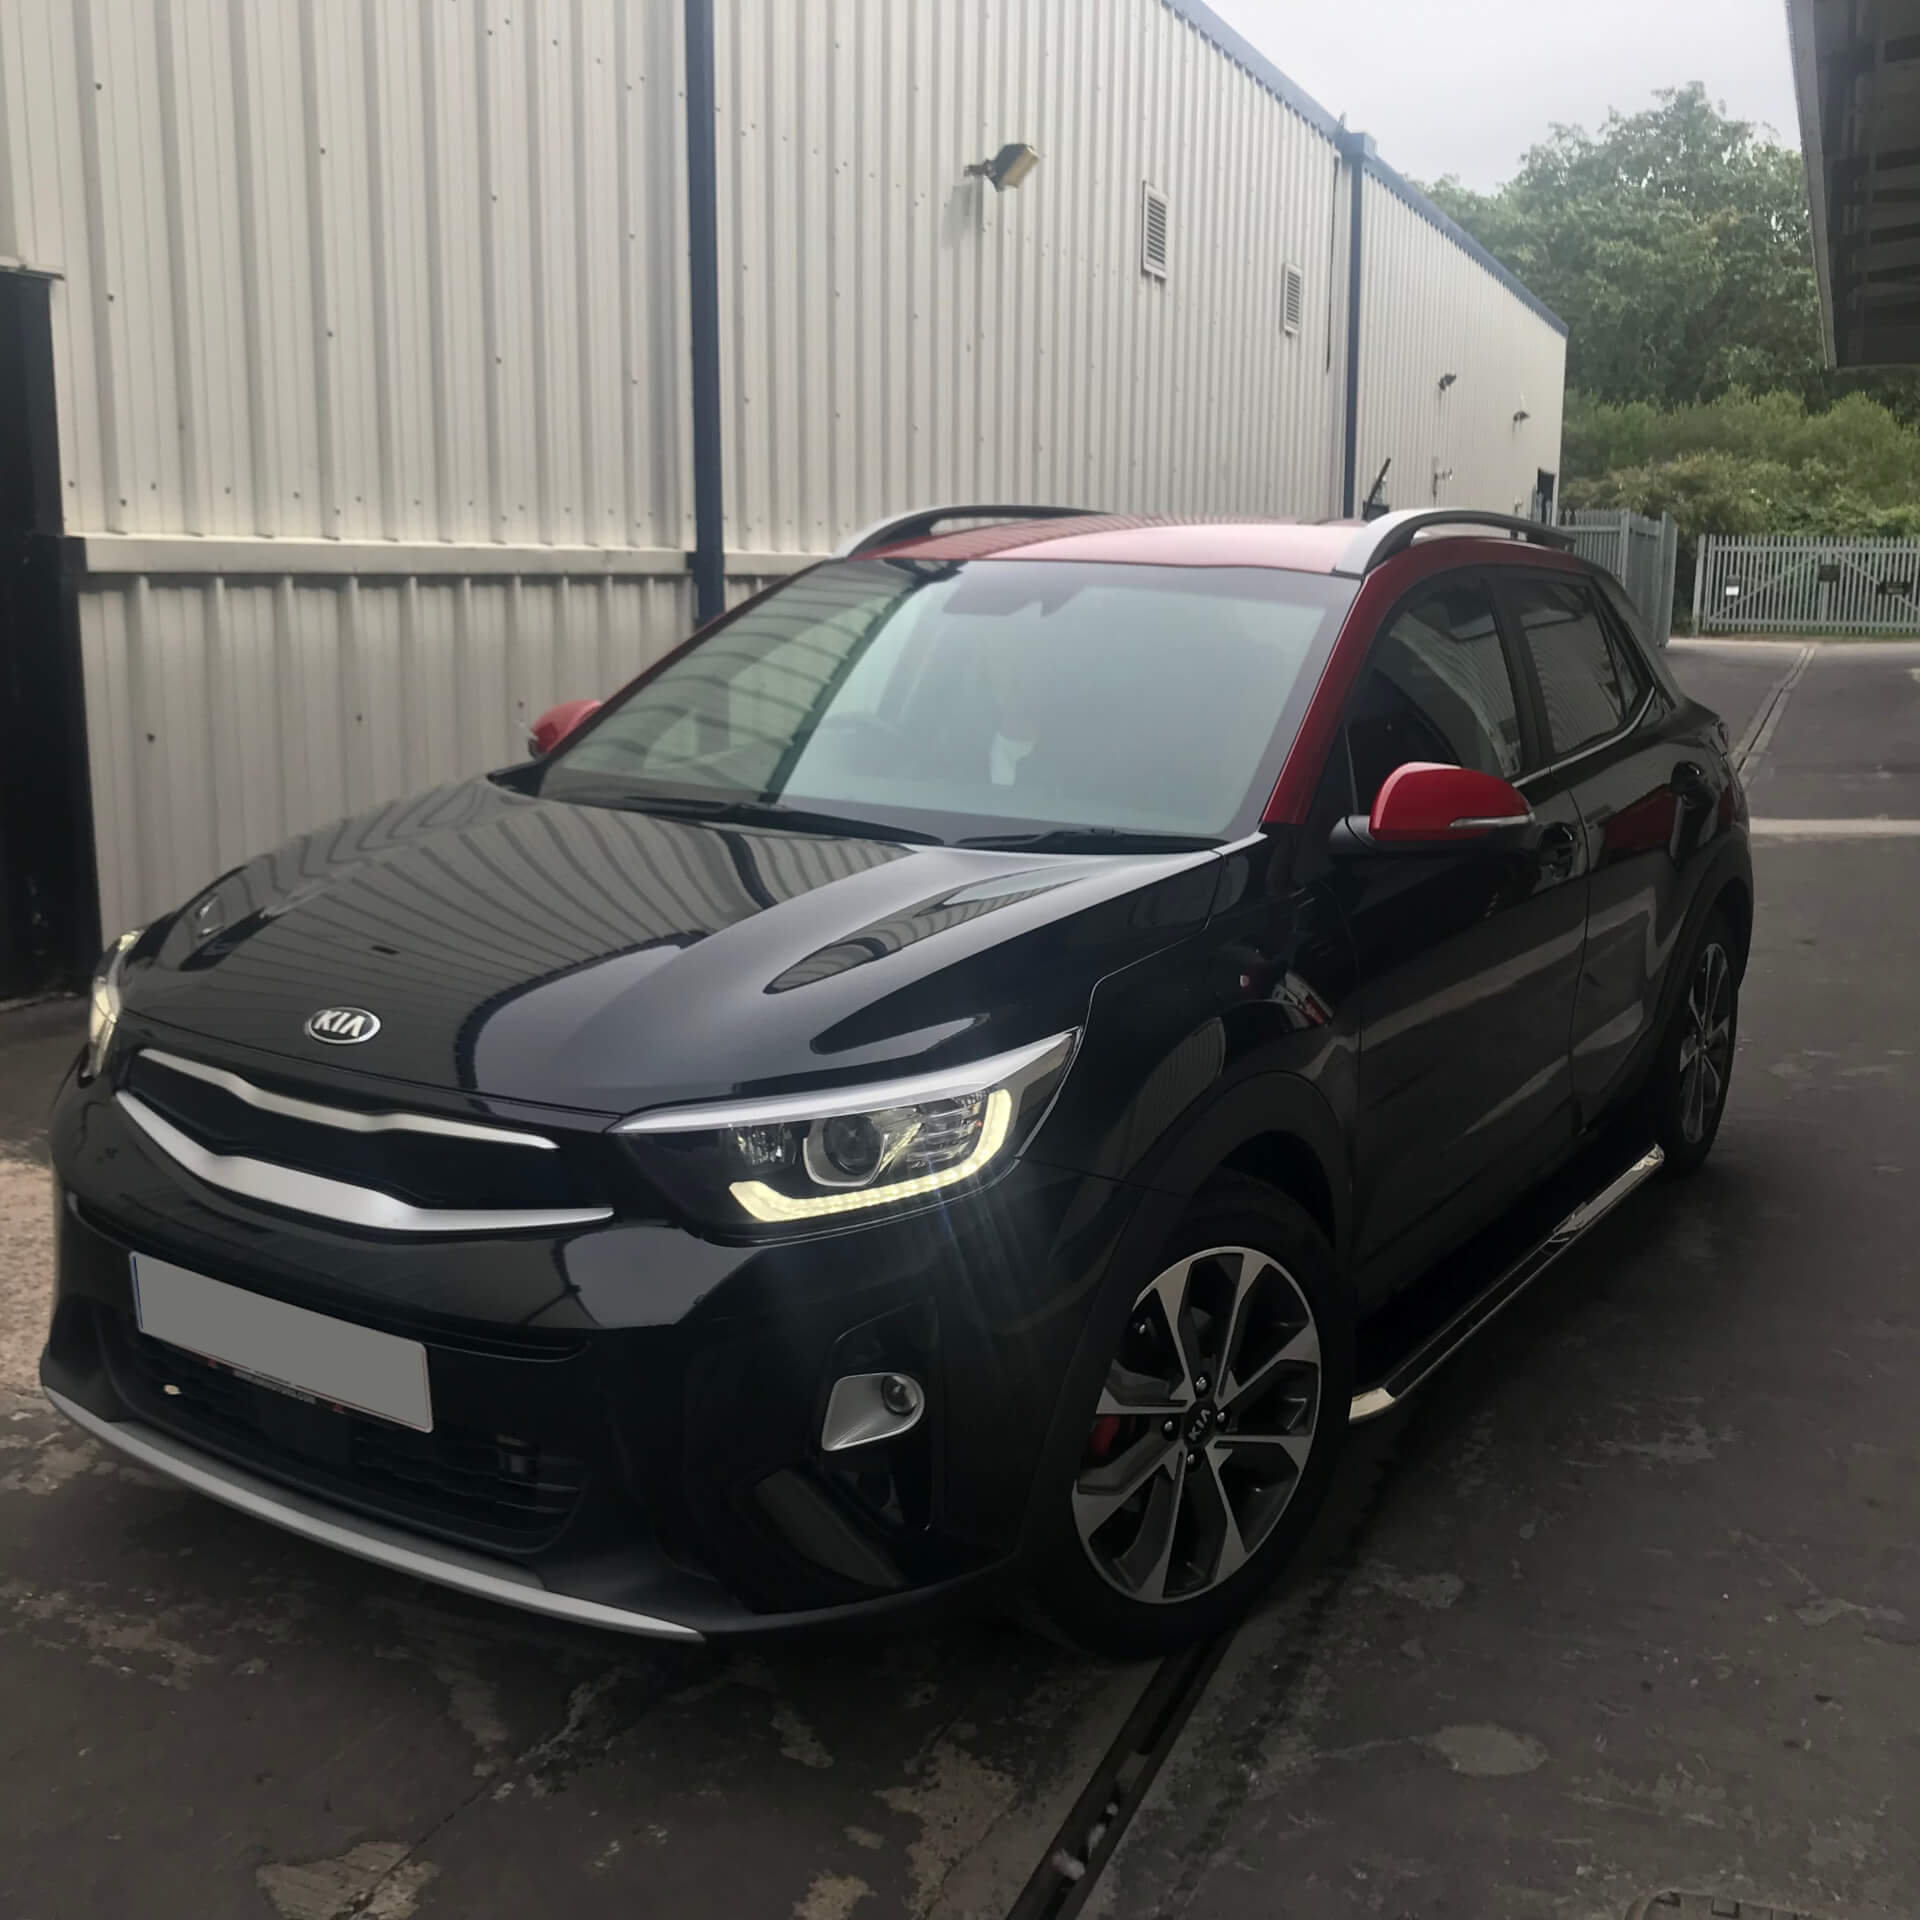 Direct4x4 accessories for Kia Stonic vehicles with a photo of a black Kia Stonic with a red roof and wing mirrors fitted with our high flyer side steps